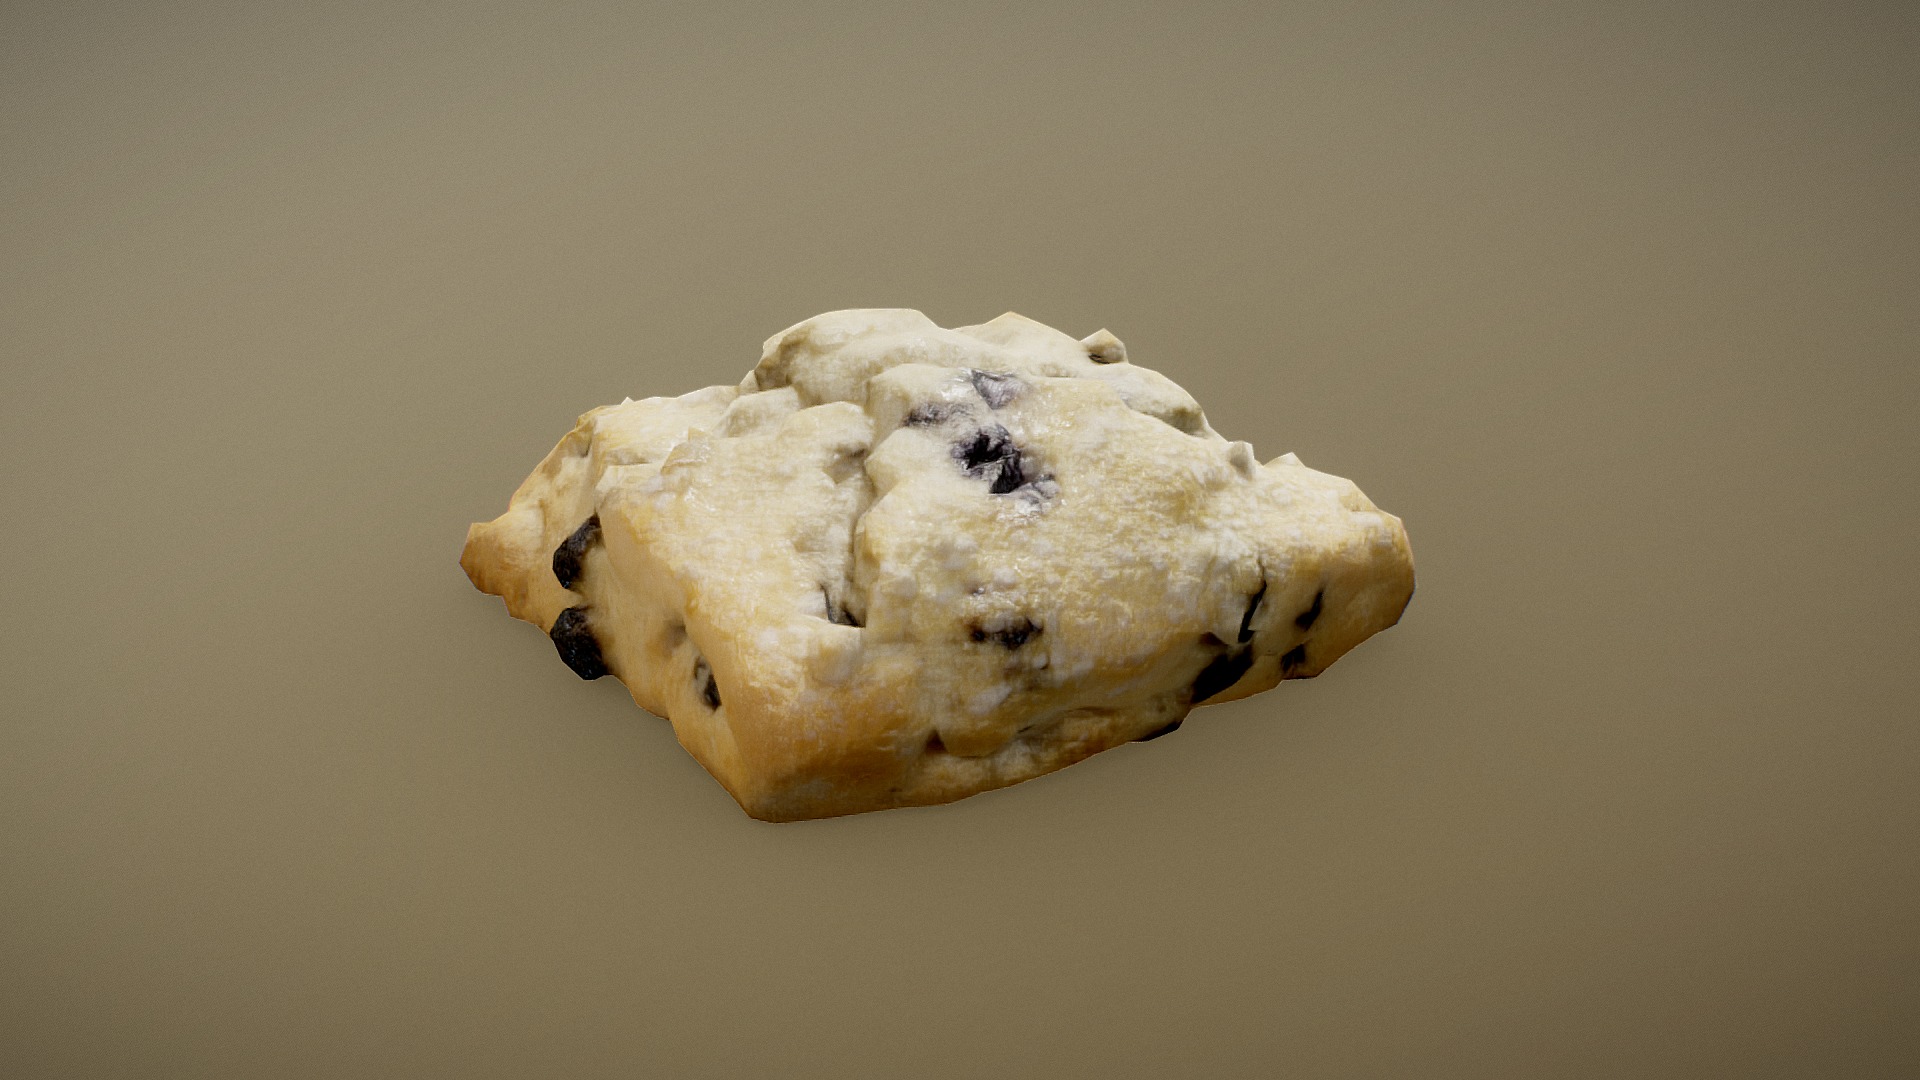 3D model Starbucks Blueberry Scone - This is a 3D model of the Starbucks Blueberry Scone. The 3D model is about a piece of food.